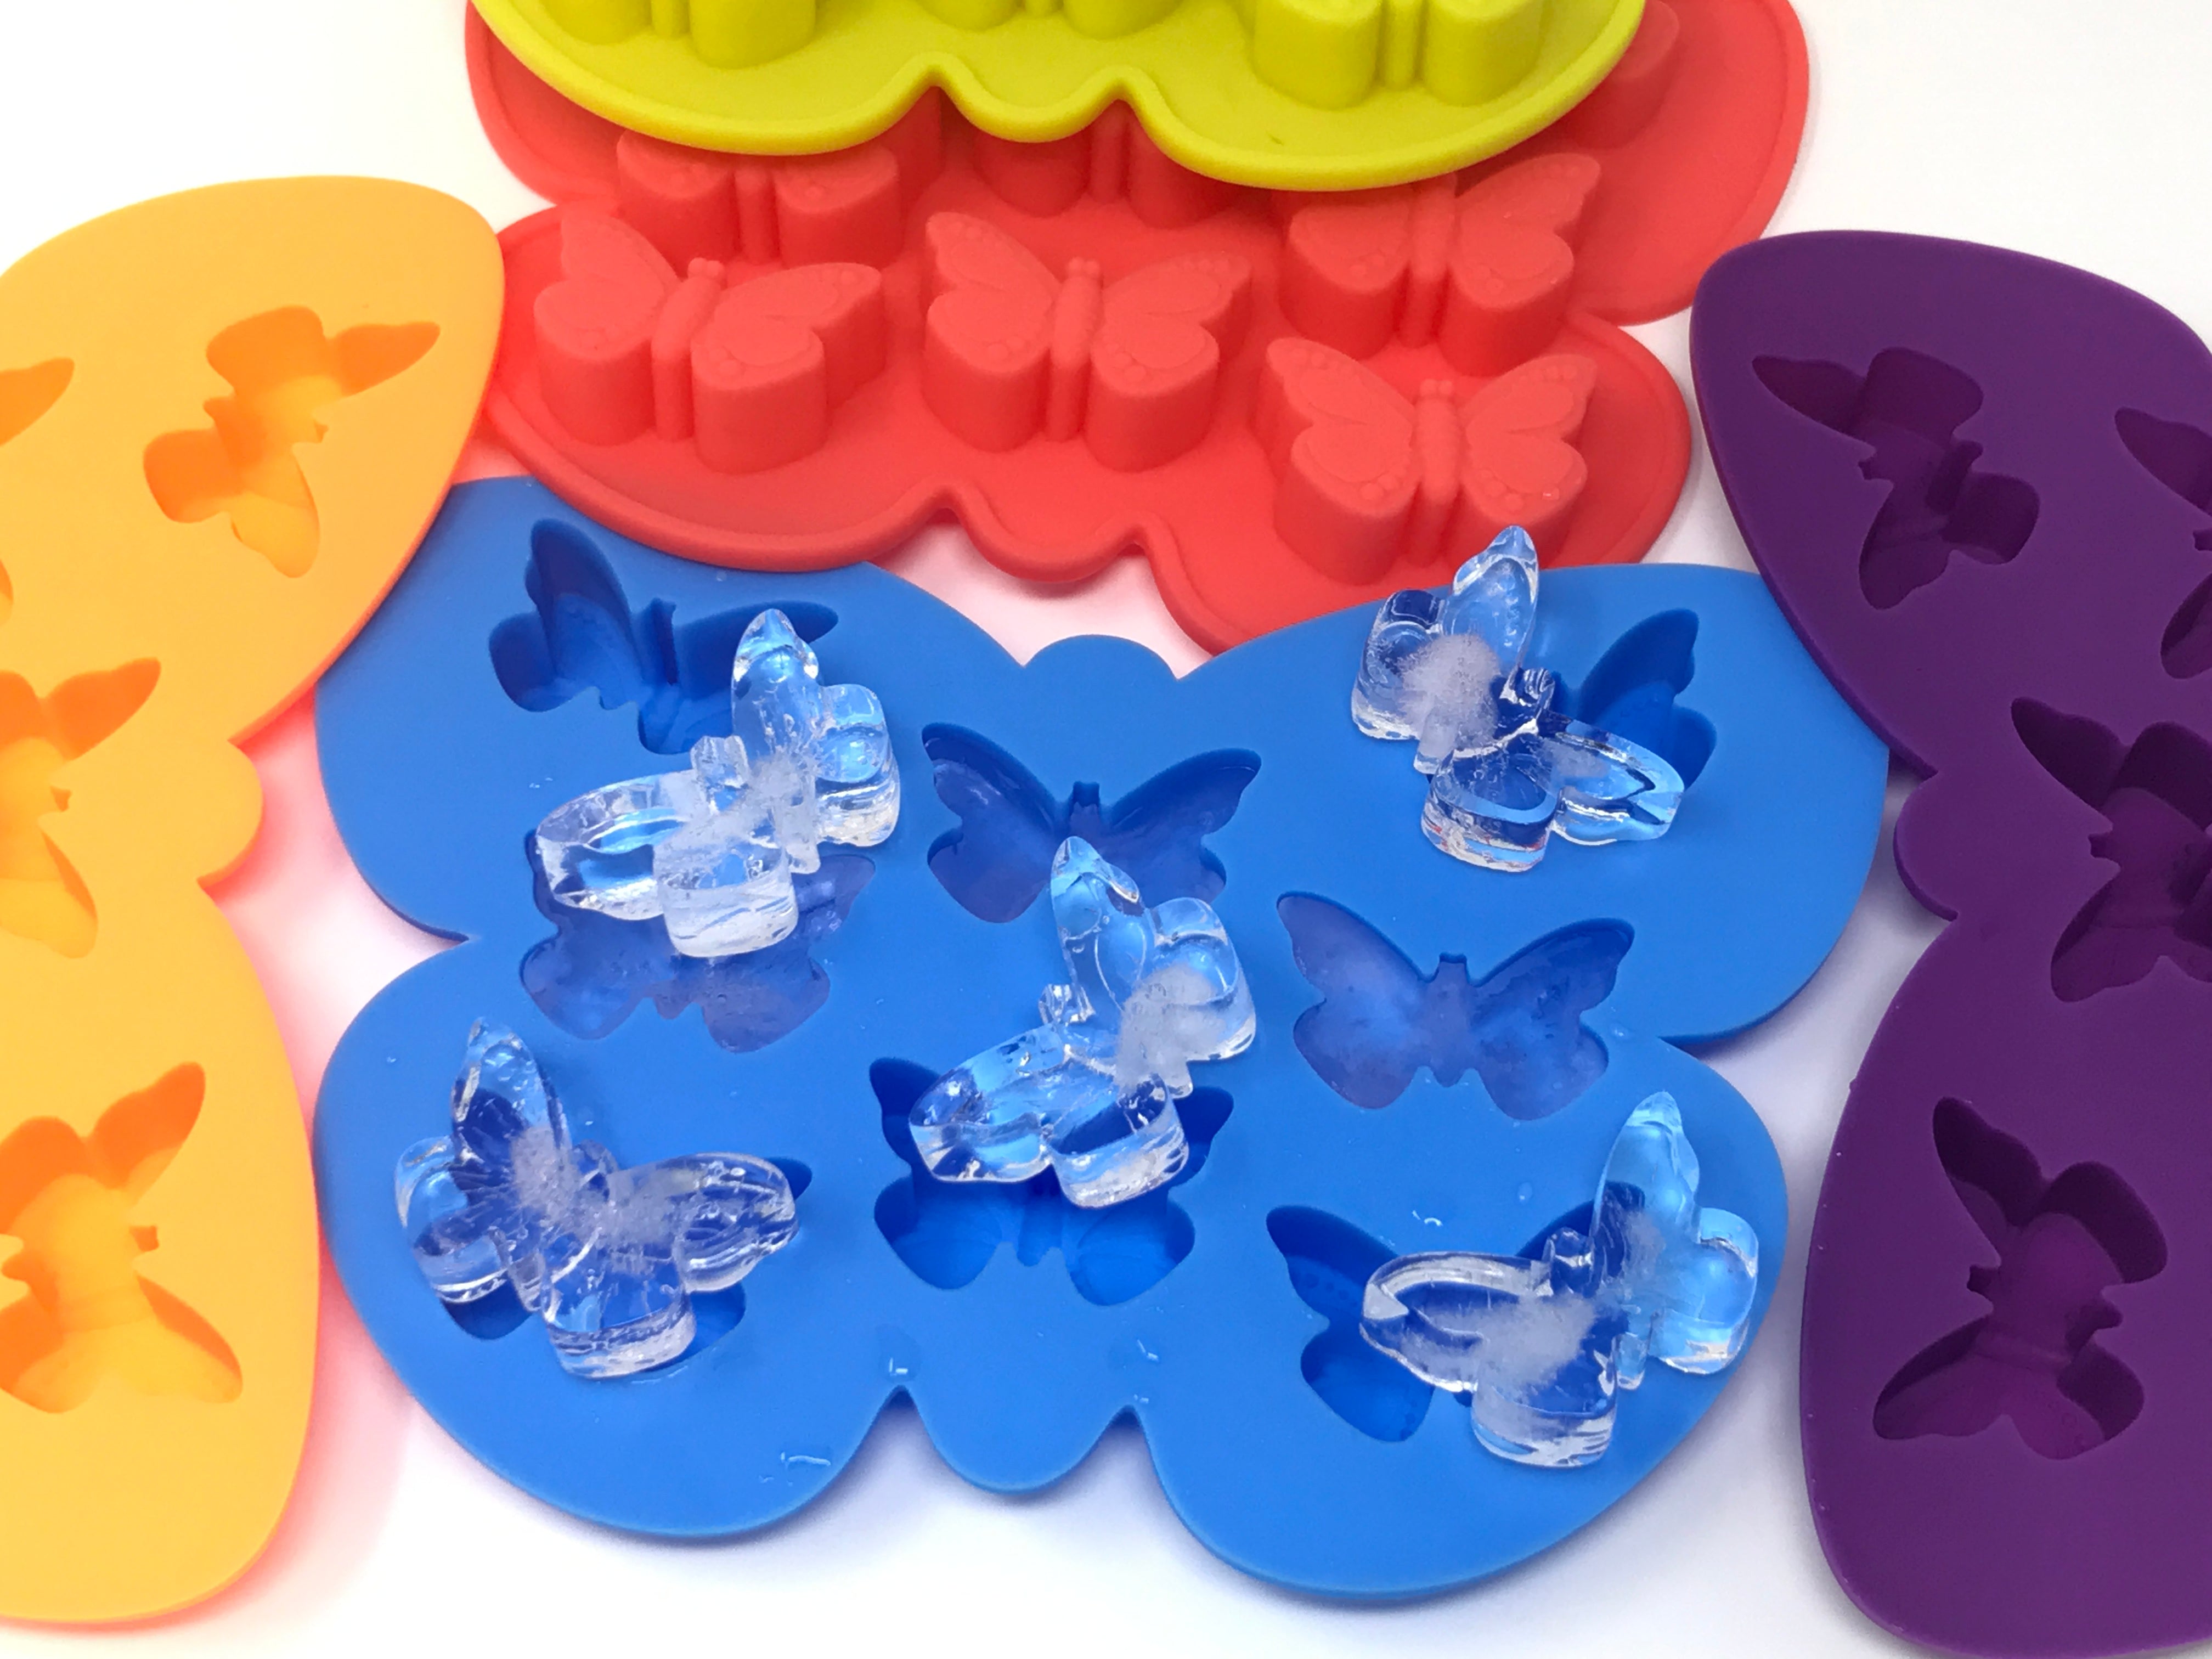 SPRING PARK Butterfly Mold Silicone Butterfly Shape Butterfly Ice Cube Tray  Silicone Wax Melt Molds Chocolate Candy Baking Molds, Non-Stick Chocolate  Soap Pudding Jello Ice Cube Tray 